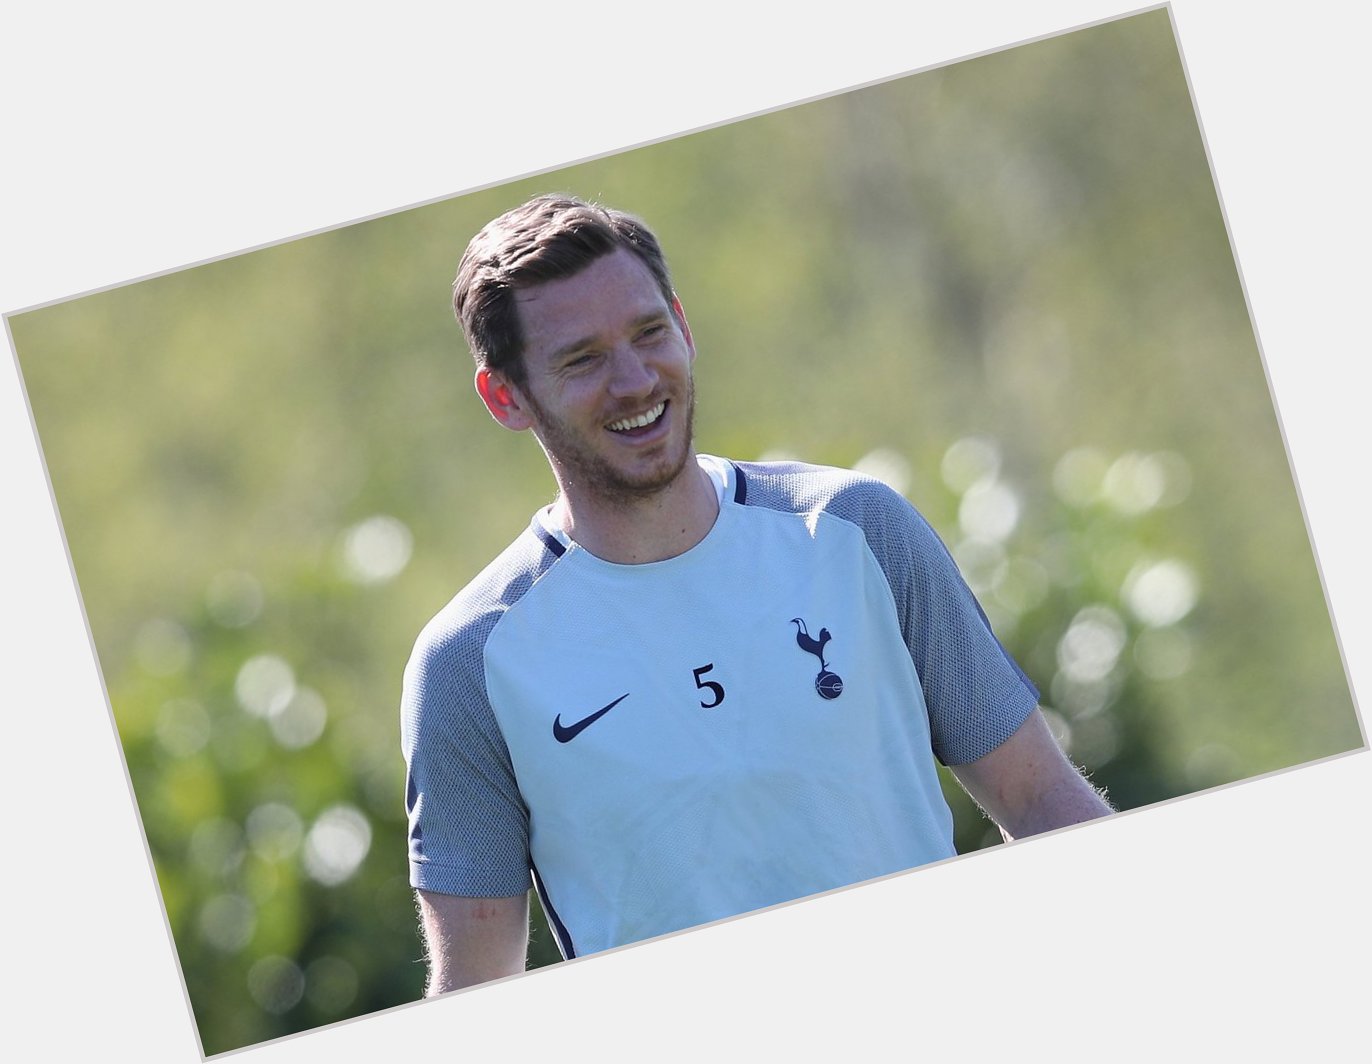 Many happy returns to both Jan Vertonghen and Ben Davies who share a birthday today  